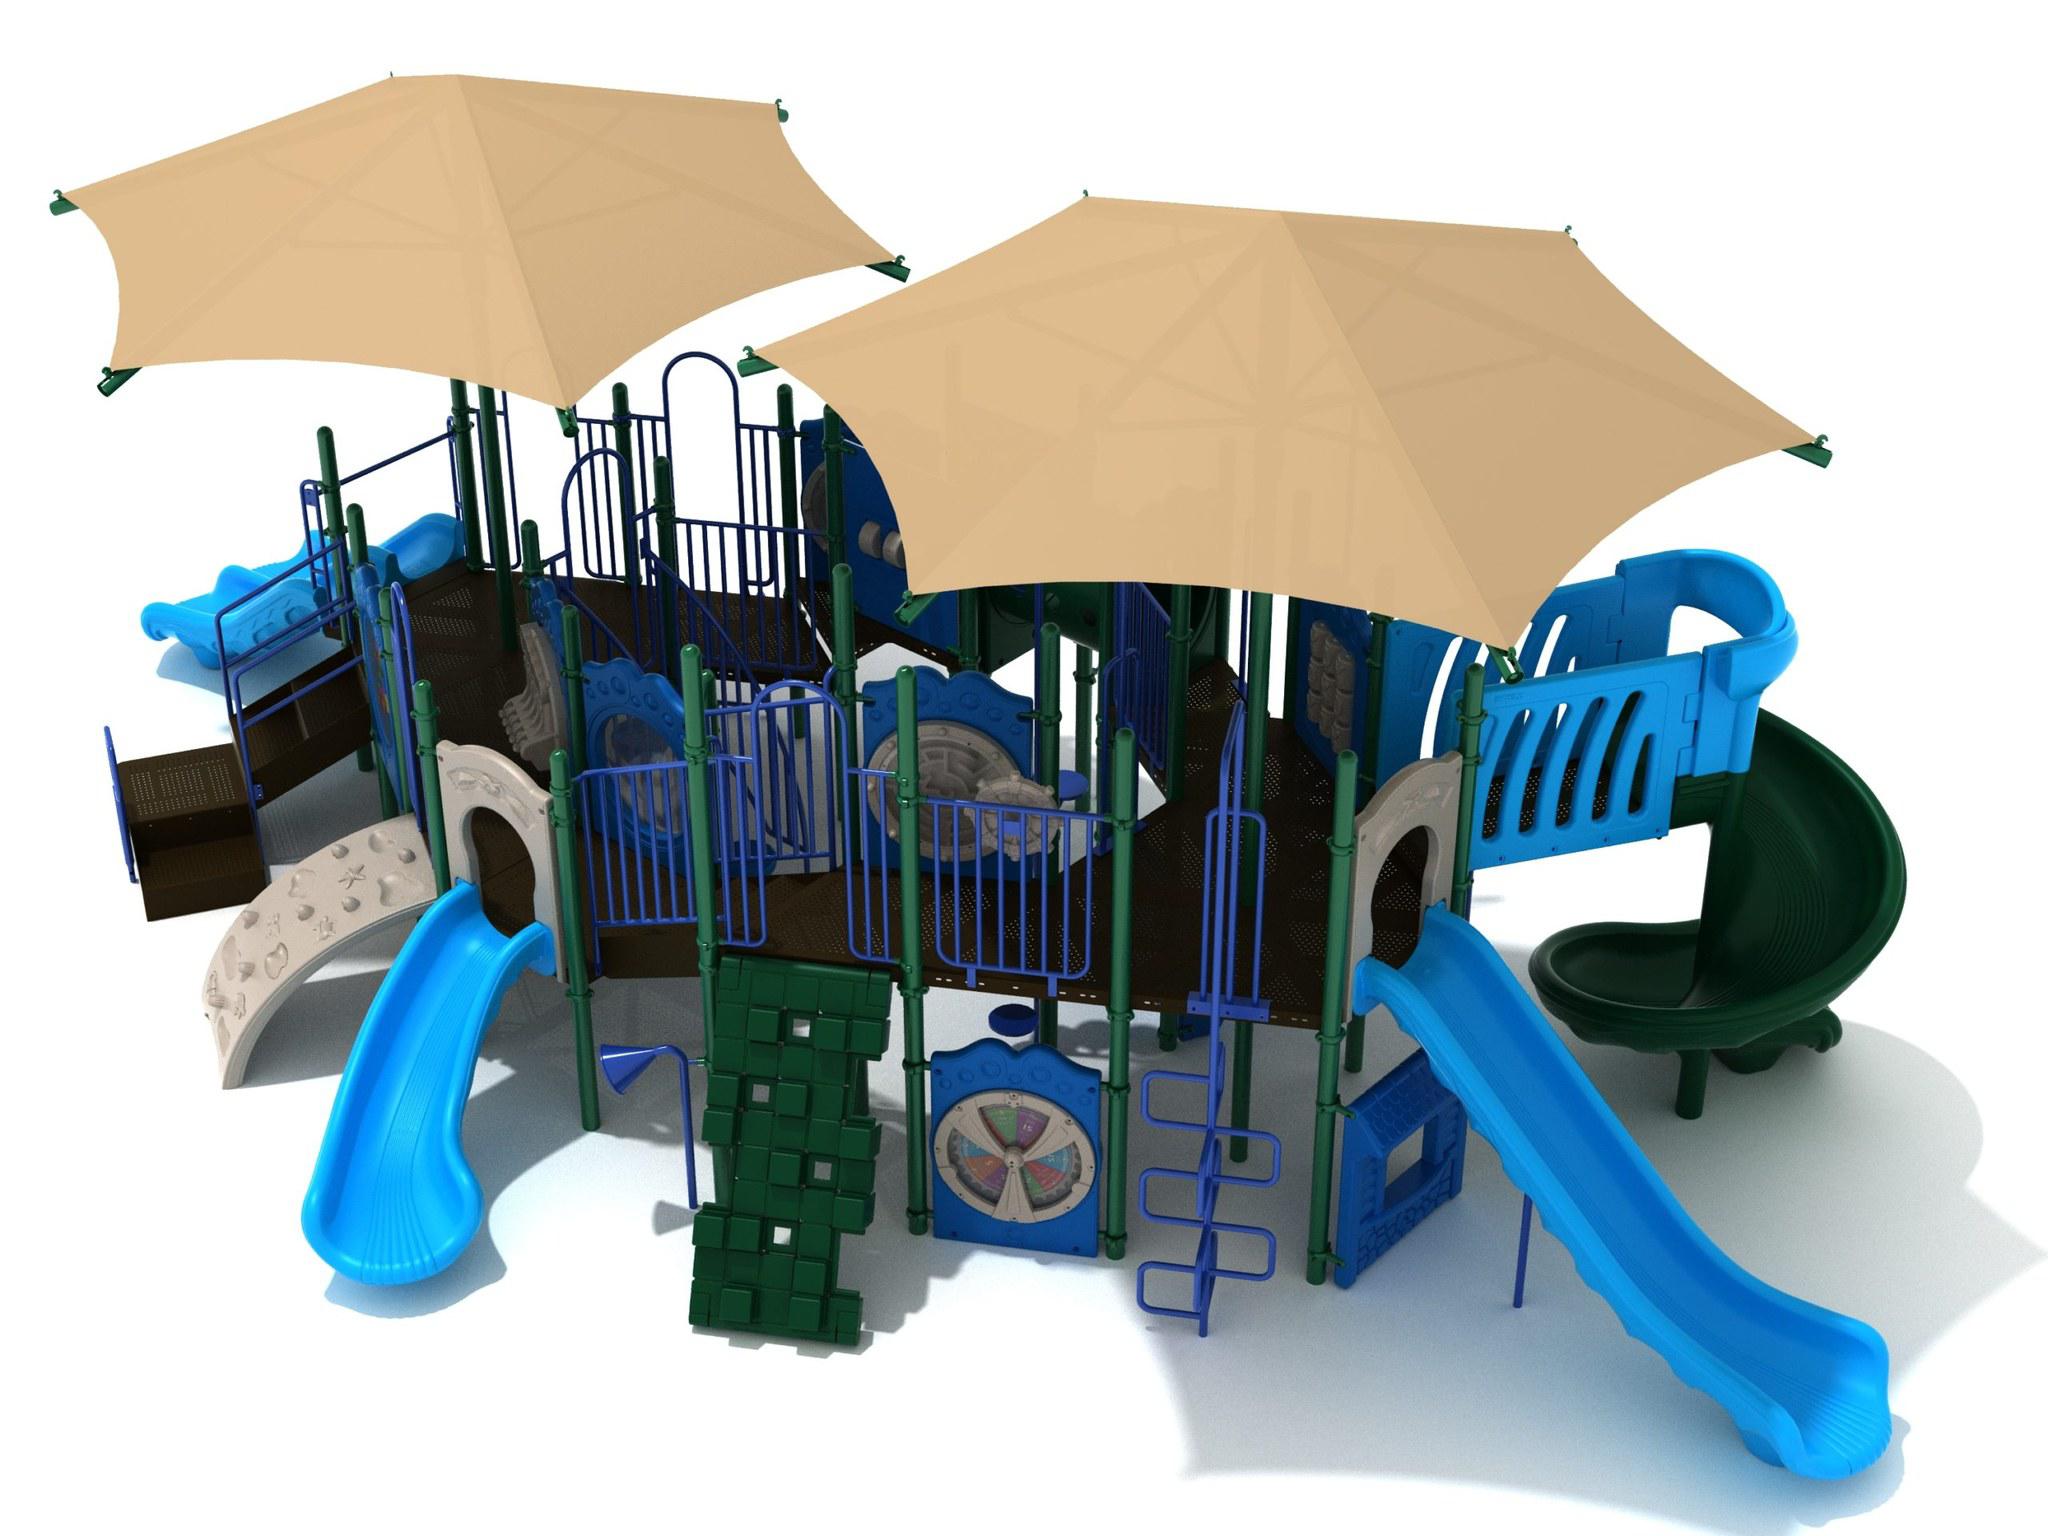 Once they hear all about the mighty collection of amusements, kids will want to pack their bags and leave tonight for the commercial-grade Paradise playscape. 
This mighty composite structure is built around a central octagon pathway whose upper level is reached by way of a short series of steps connected to a ground level Transfer Station. 
Call (615) 595-5582 to start building backyard memories that last a lifetime